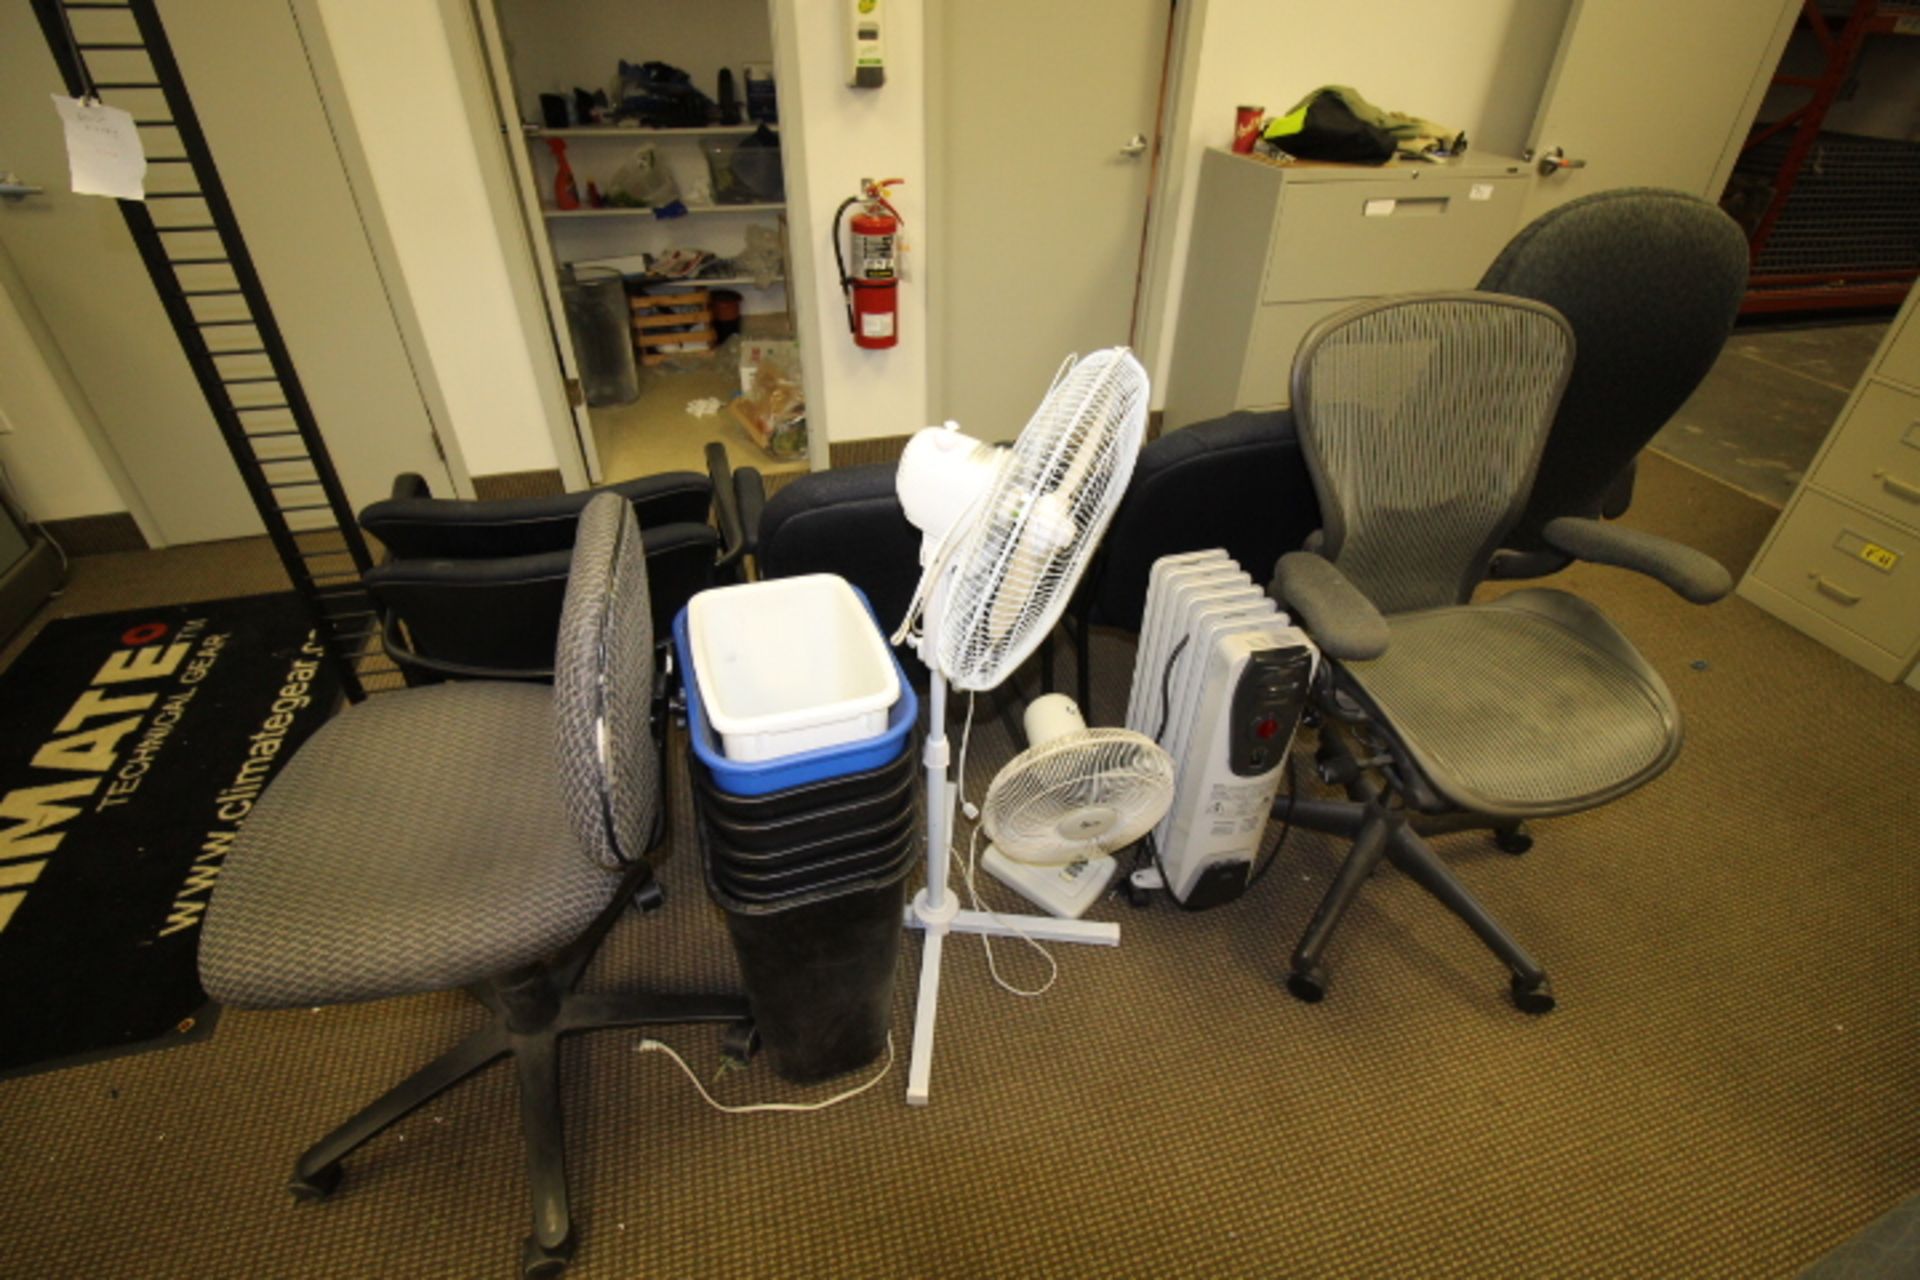 Job lot of Office Chairs including Fan, Heaters and Buckets - Image 3 of 3